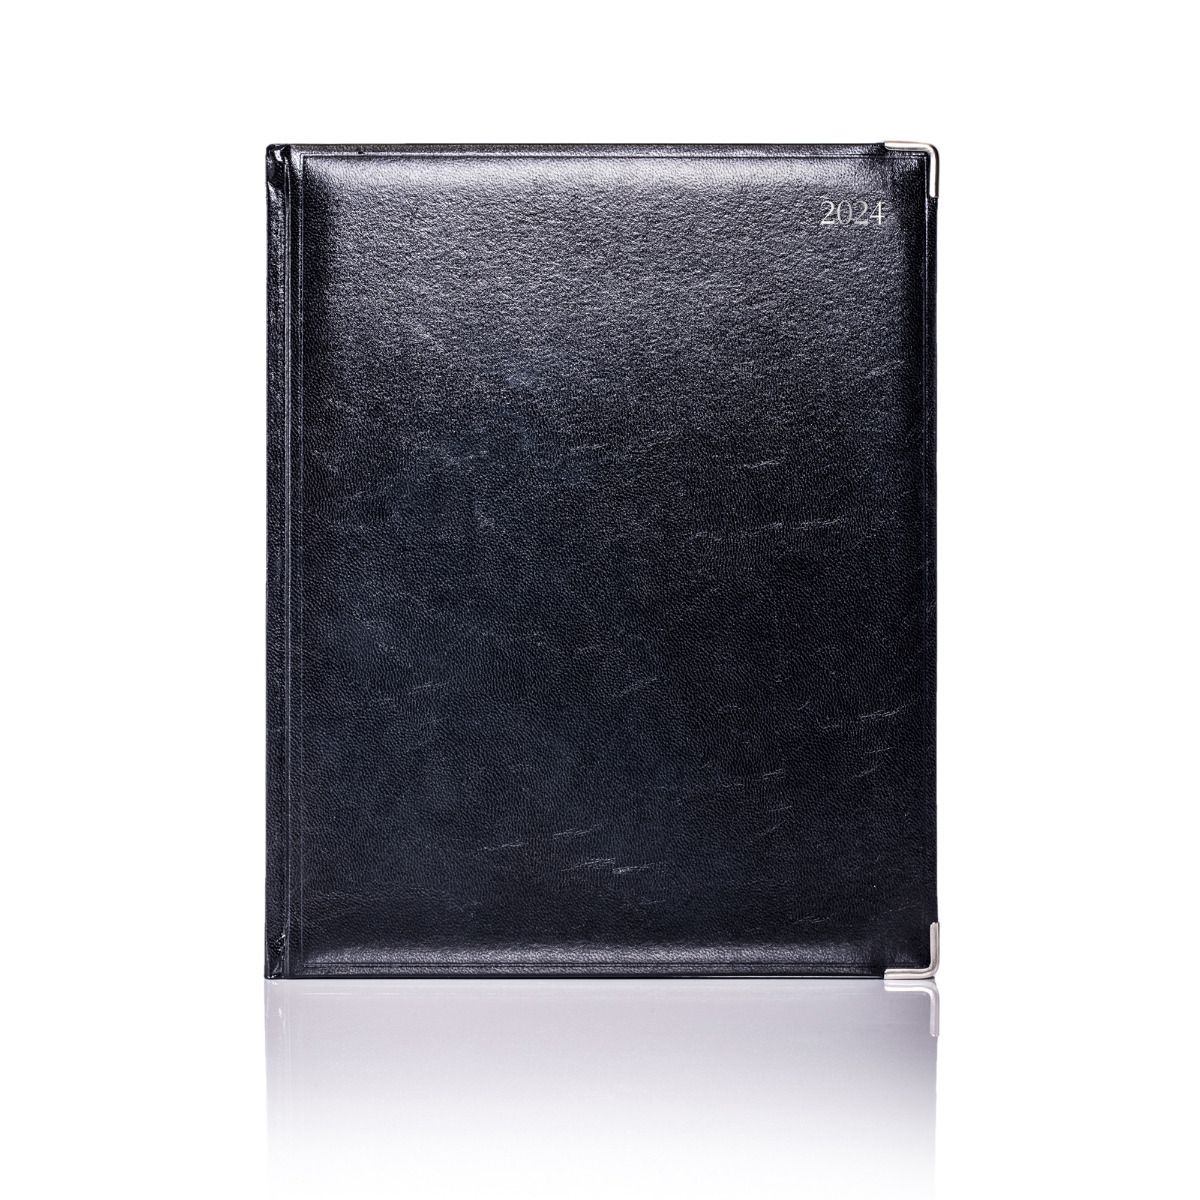 Colombia De Luxe Diary Cream Pages 2024 - Black